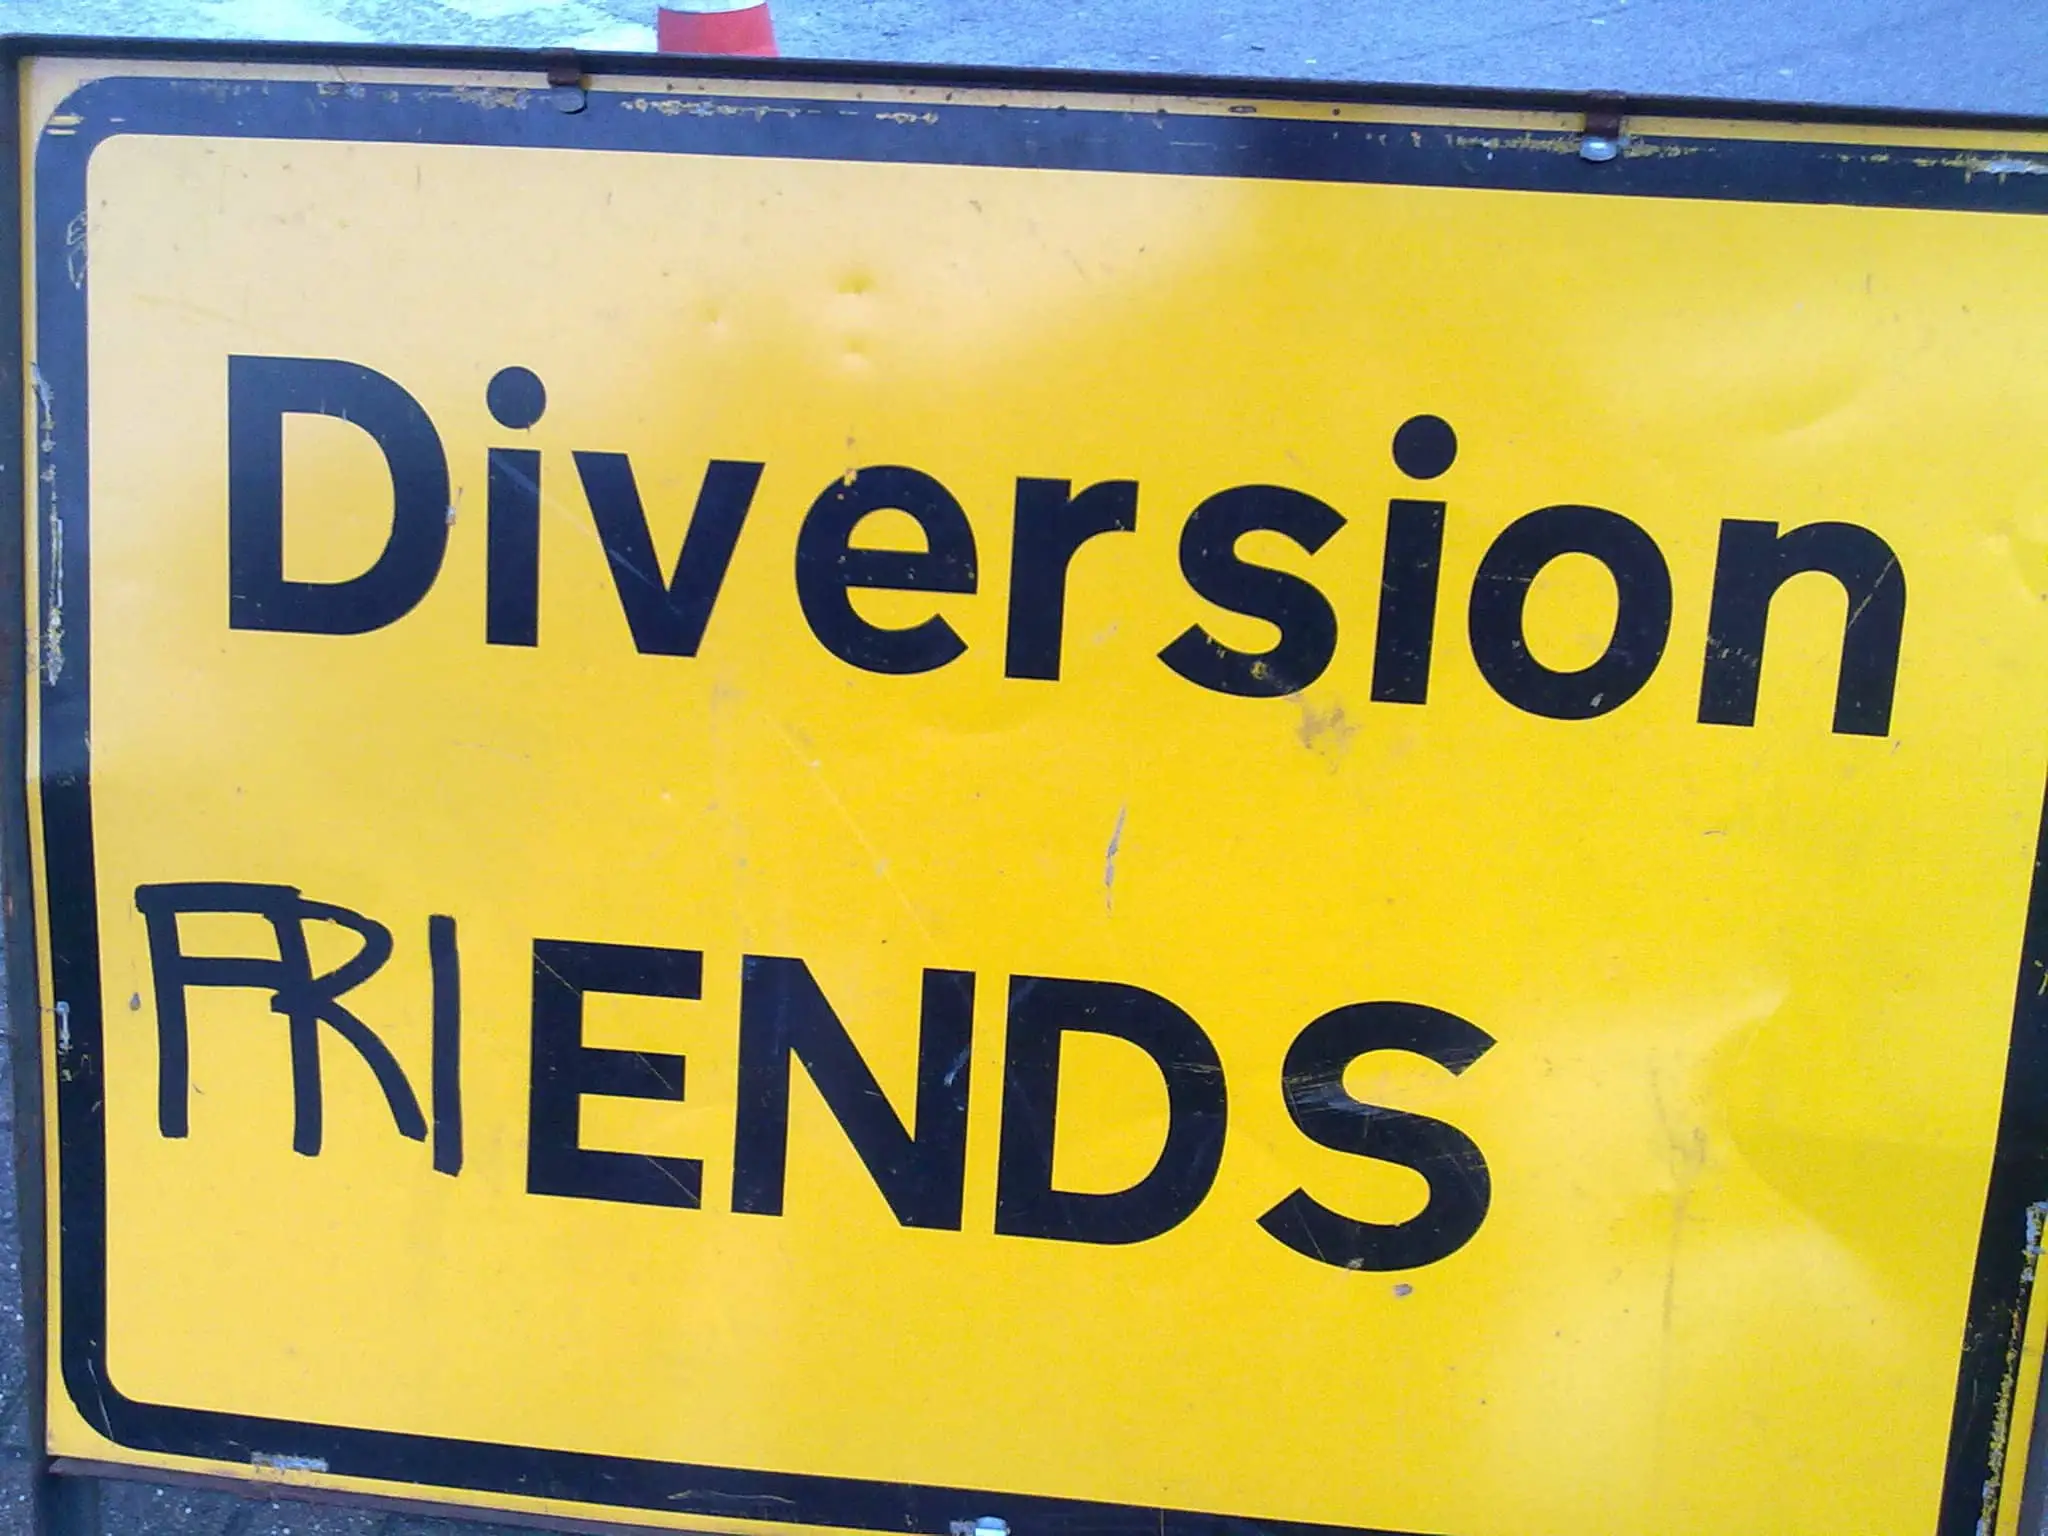 Diversion sign with 'fri' drawn on changing it into friends